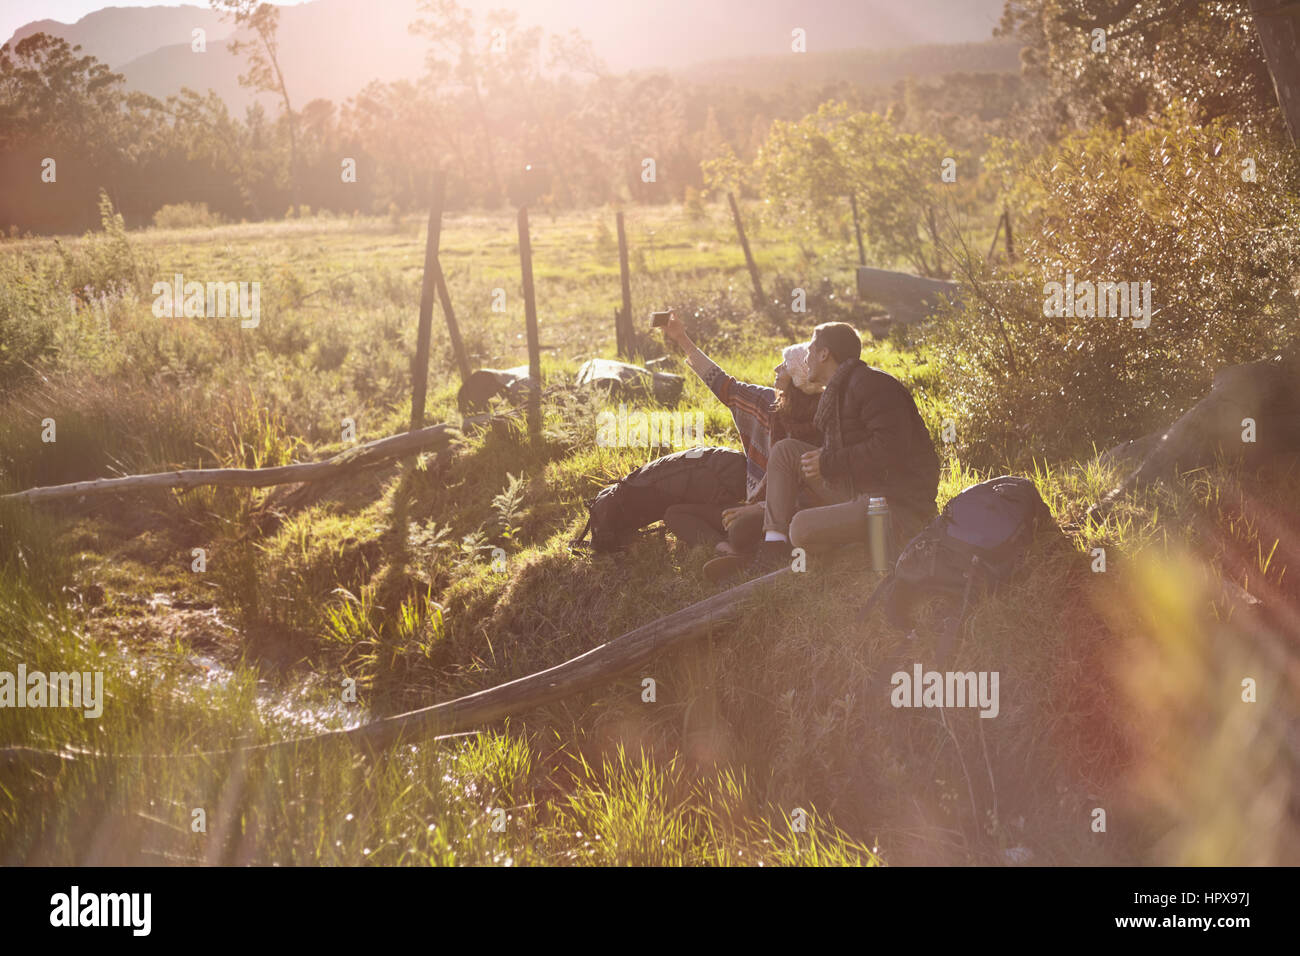 Young couple with camera phone taking selfie in sunny, remote field Stock Photo